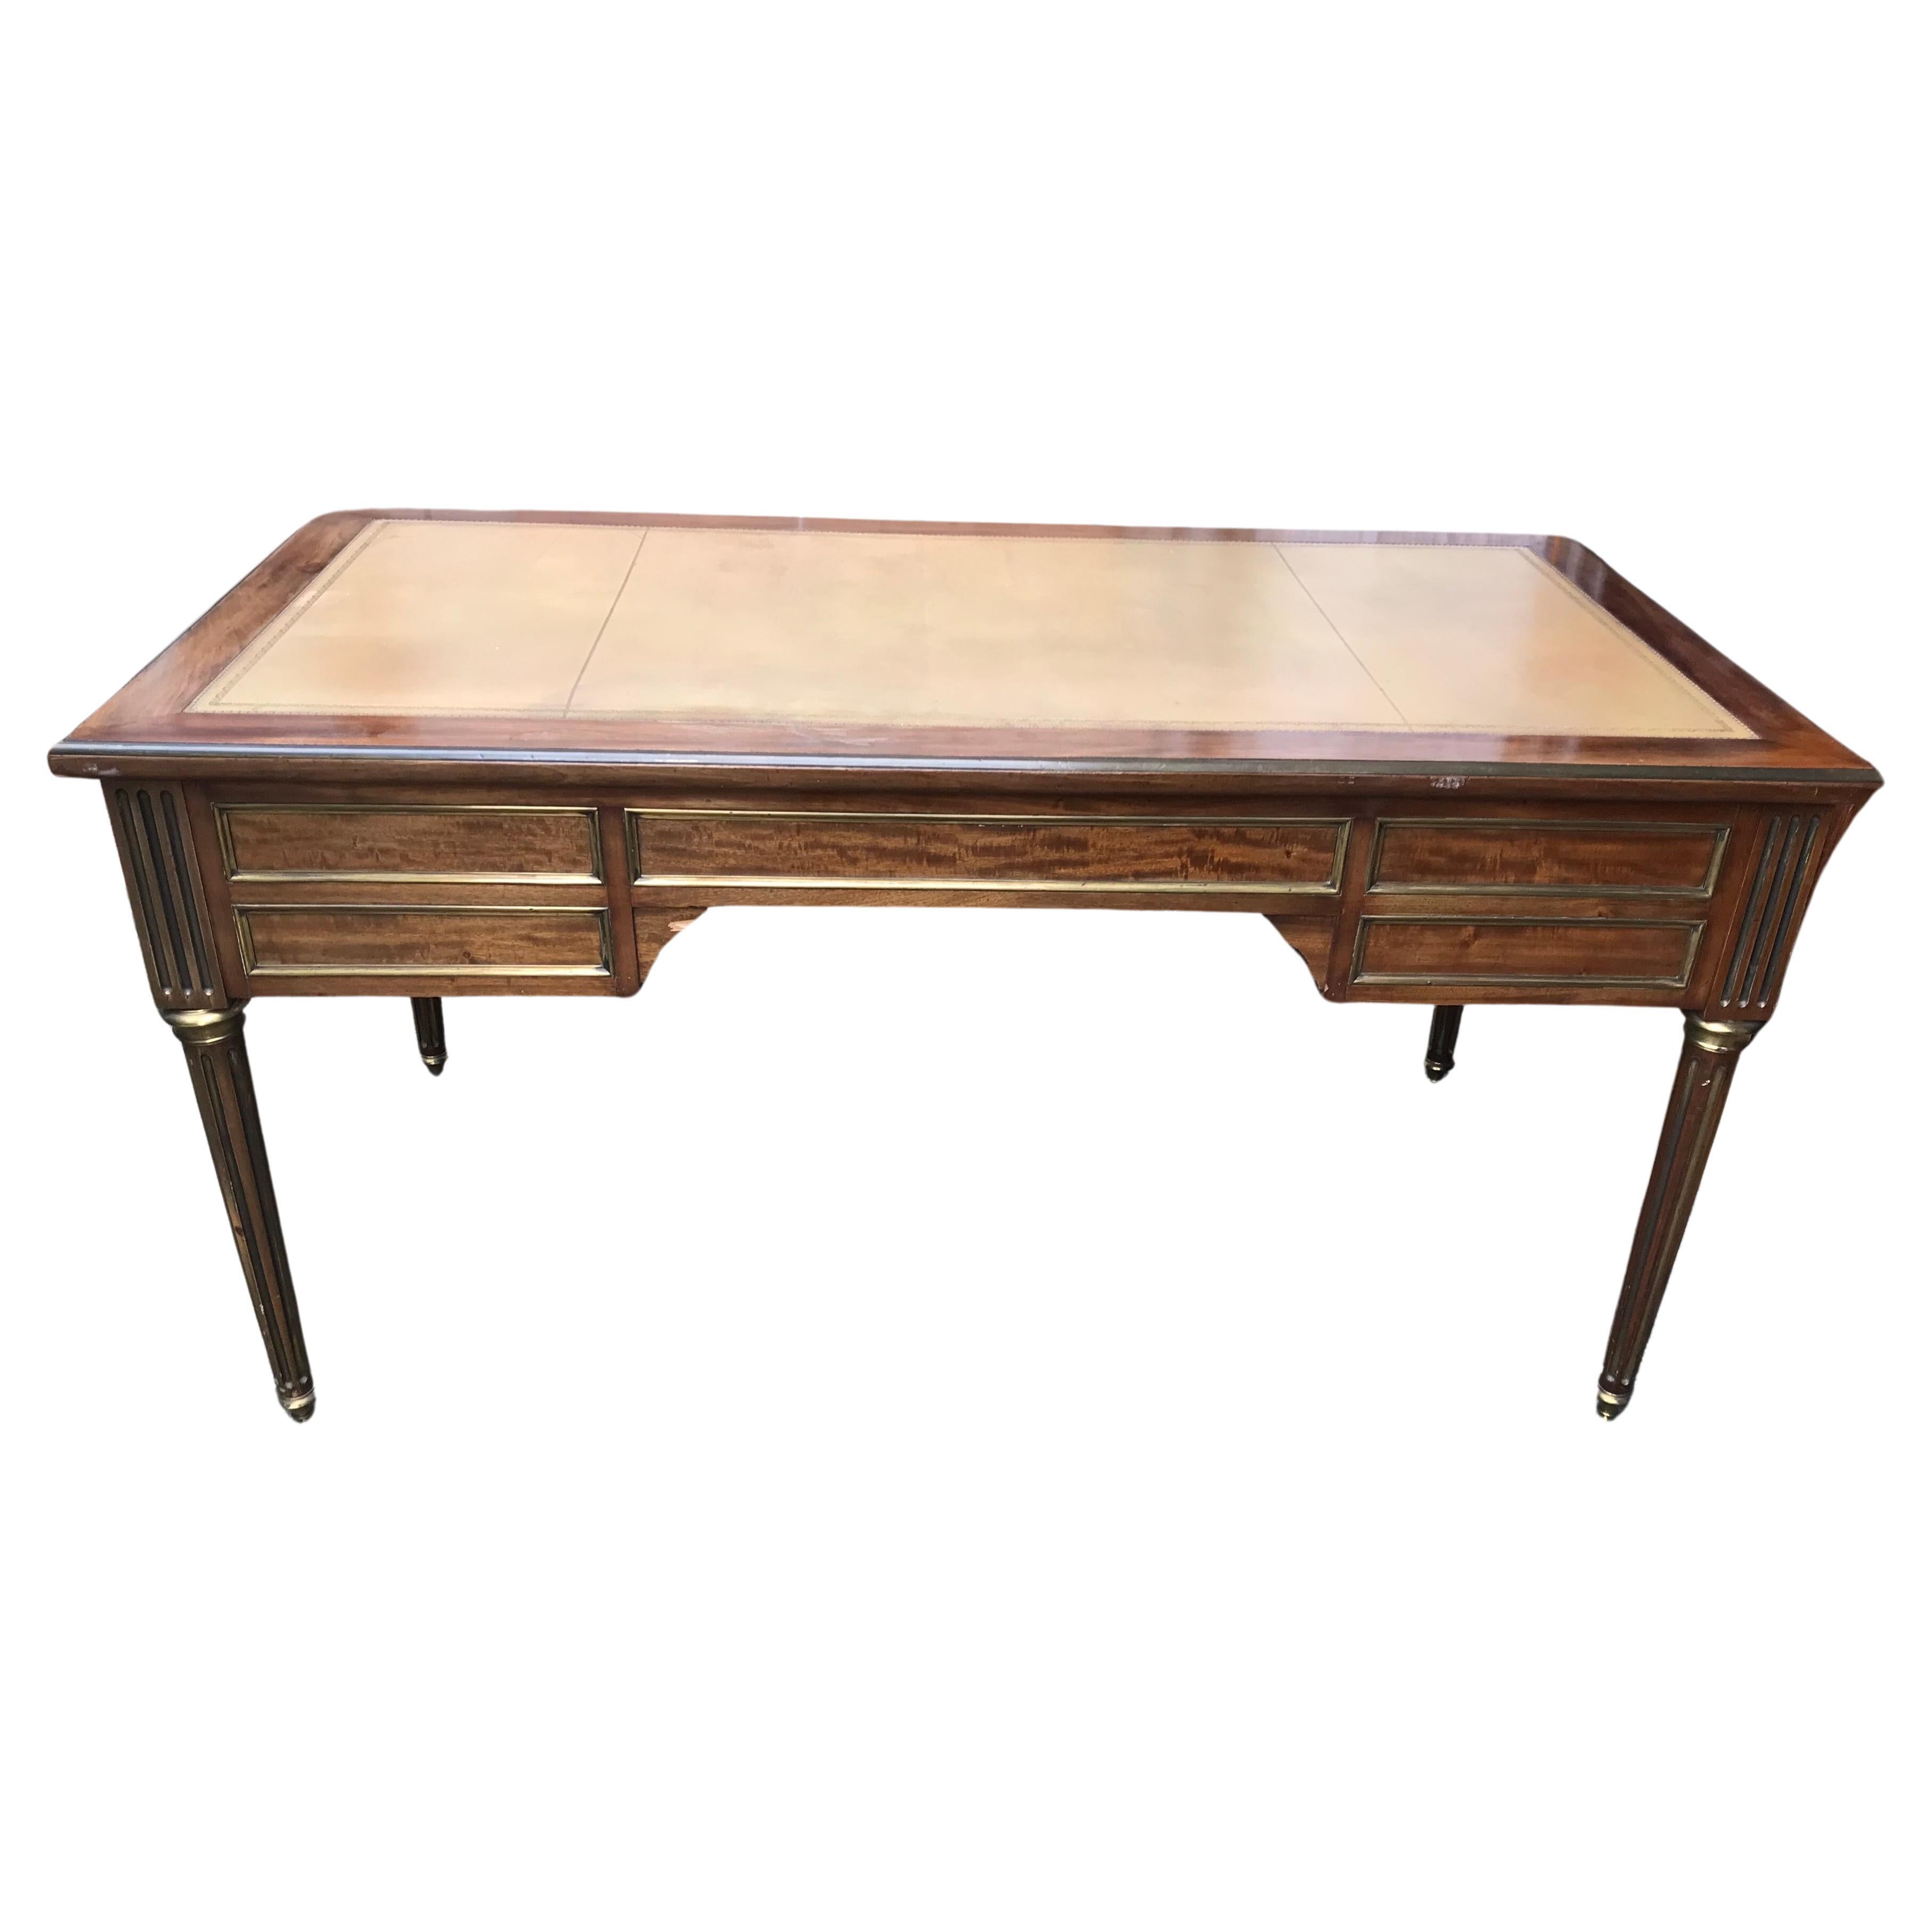 This elegant Directoire style desk dates back to the second half of the 19th century. The desk has a pretty mahogany veneer and is additionally embellished with brass fillets. The top is covered with light brown leather and has two additional